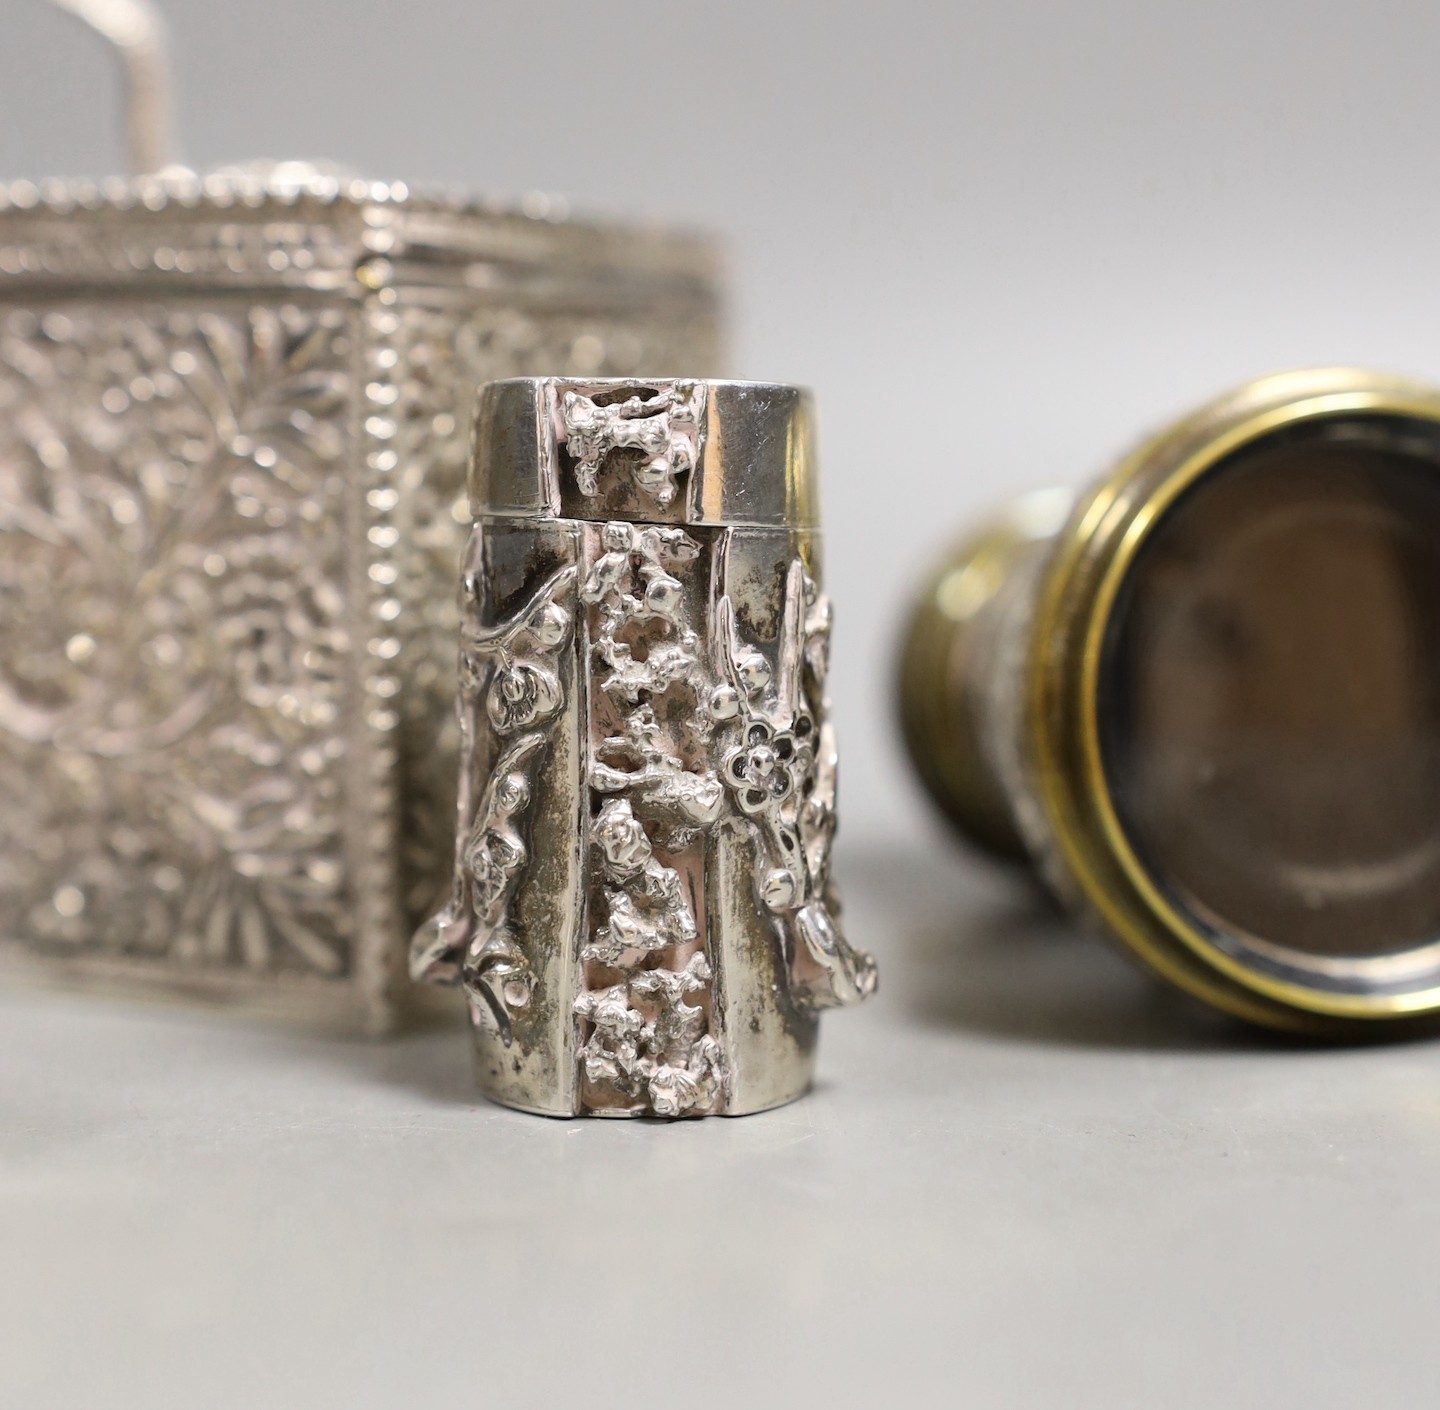 A late Victorian Indian silver box and cover, with serpent finial, import marks for London, 1898, 9cm, a Chinese Export white metal condiment, a pair of late Victorian silver mounted opera glasses and a white metal paras